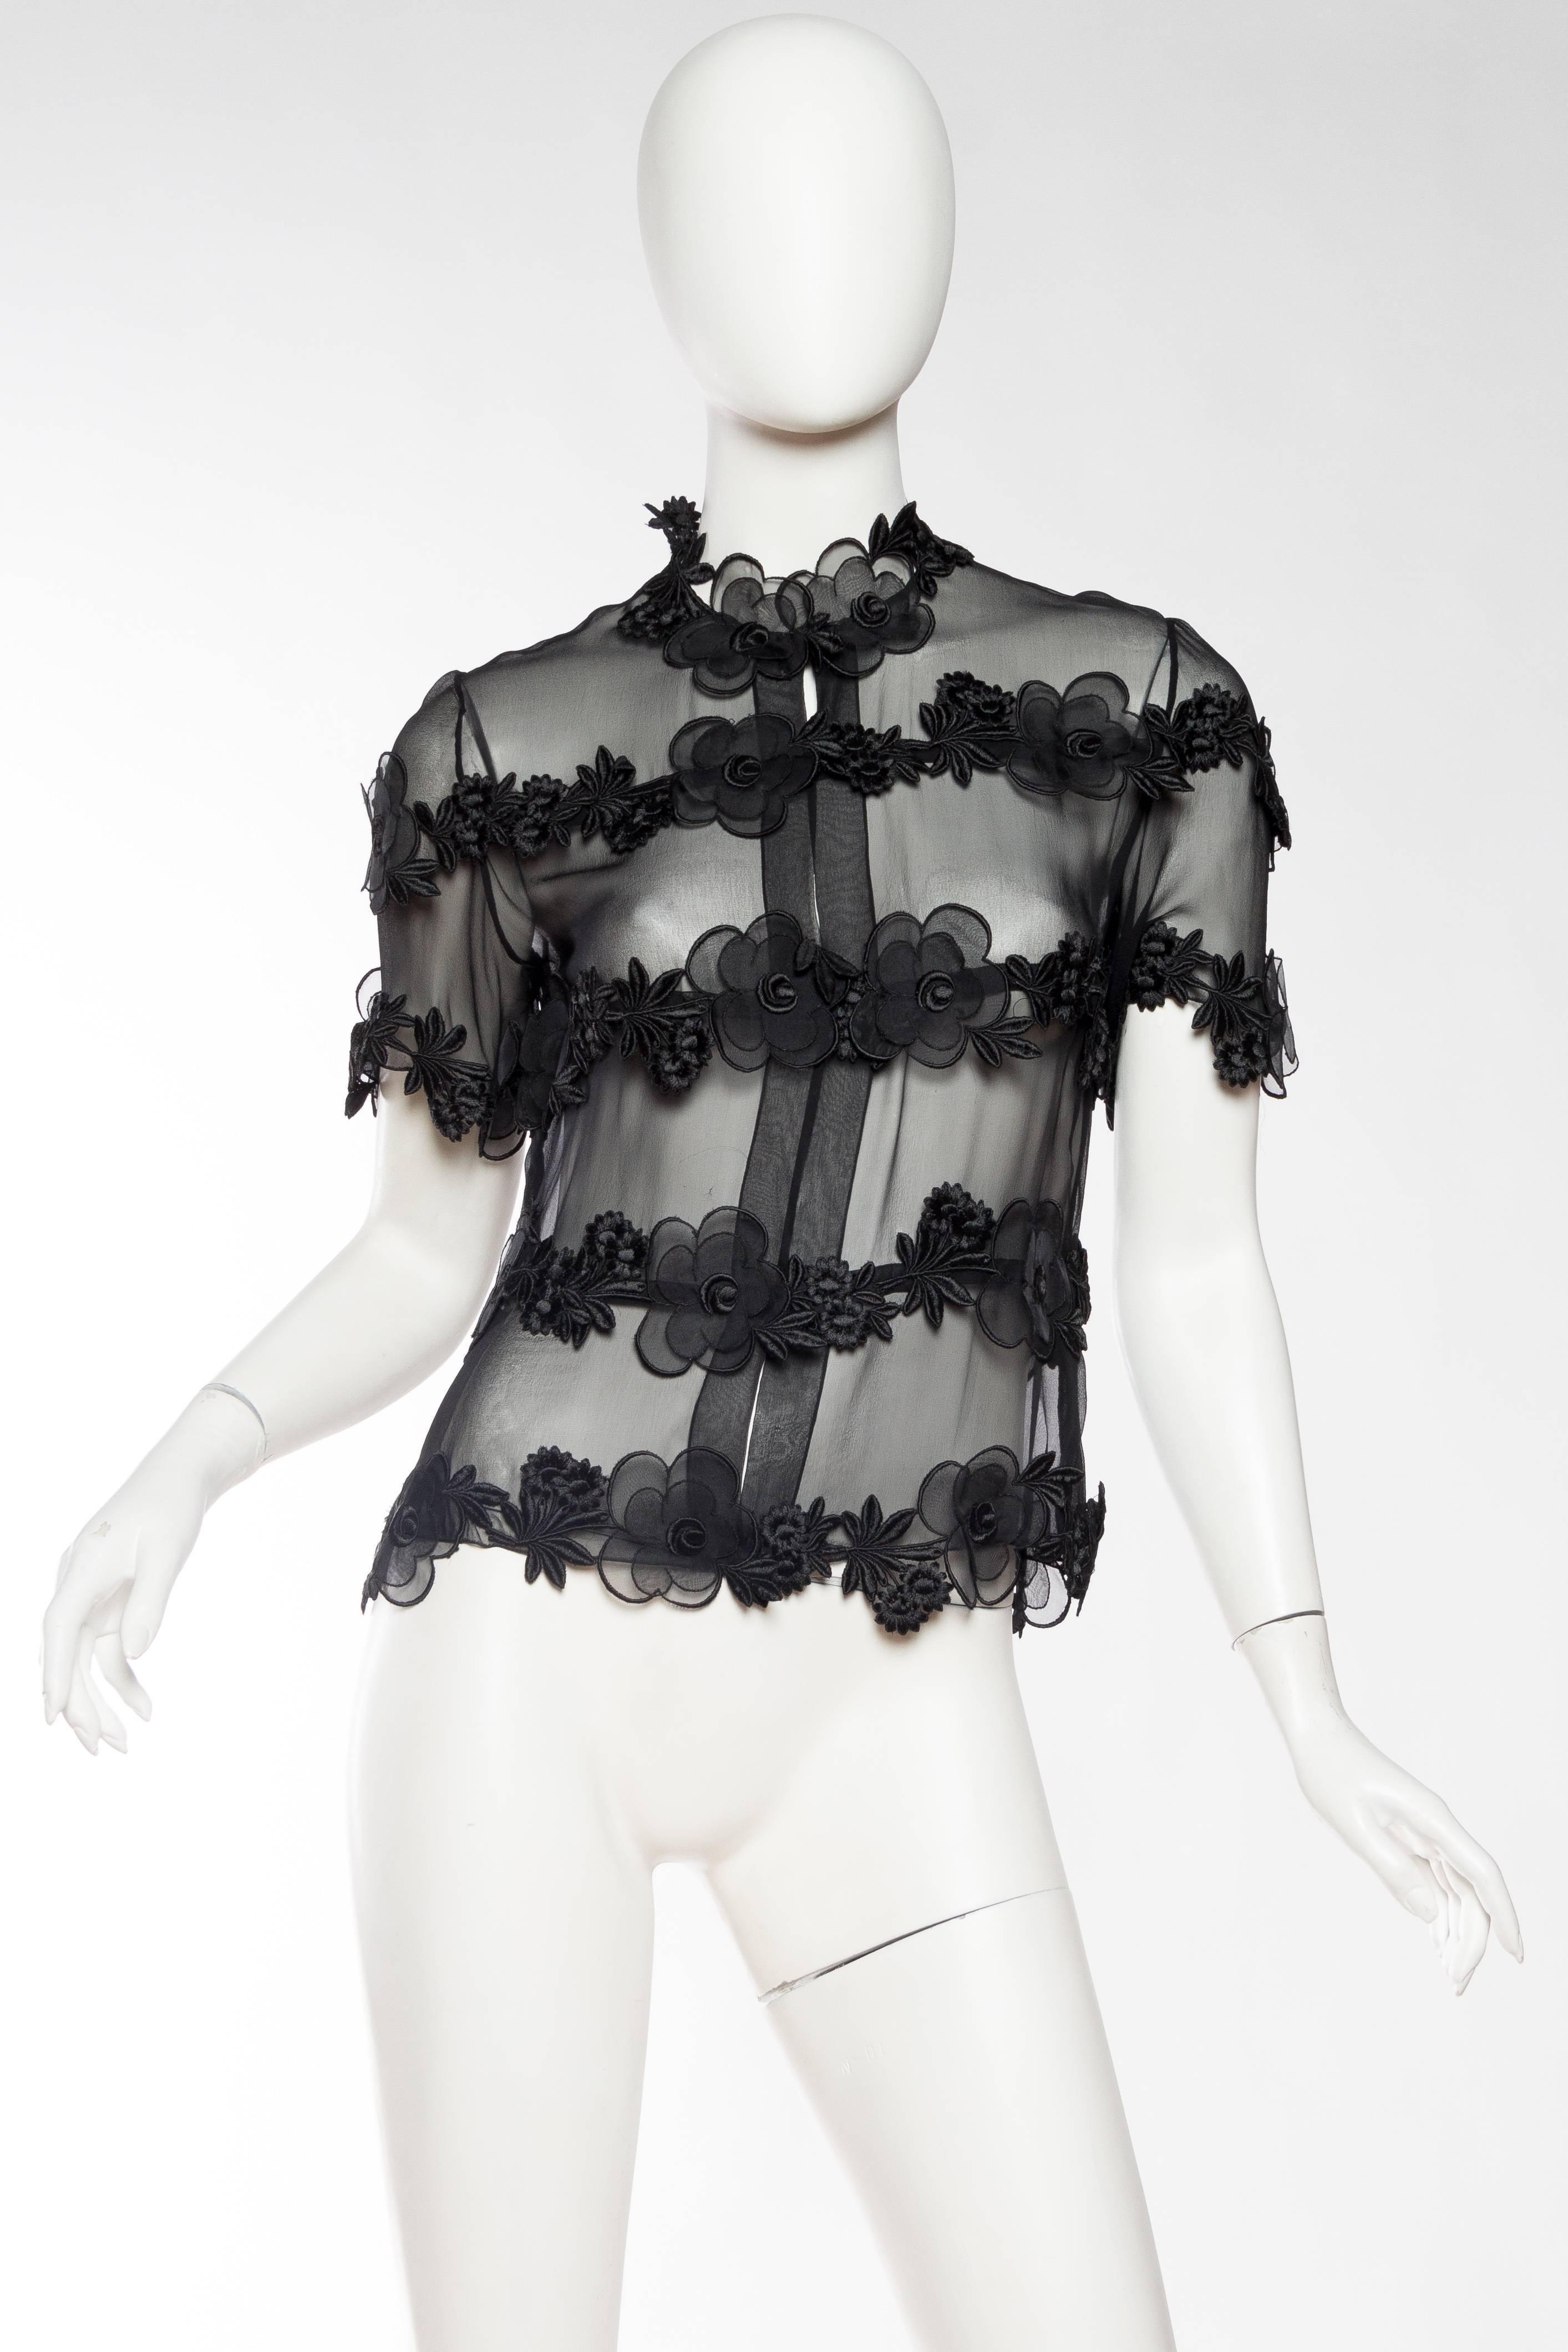 This piece has had the label stolen out of it so we are forced to sell it at a low price half of it's value because of this. The quality alone will assure you however that this piece is surely Chanel. The blouse is made of a sheer chiffon with the